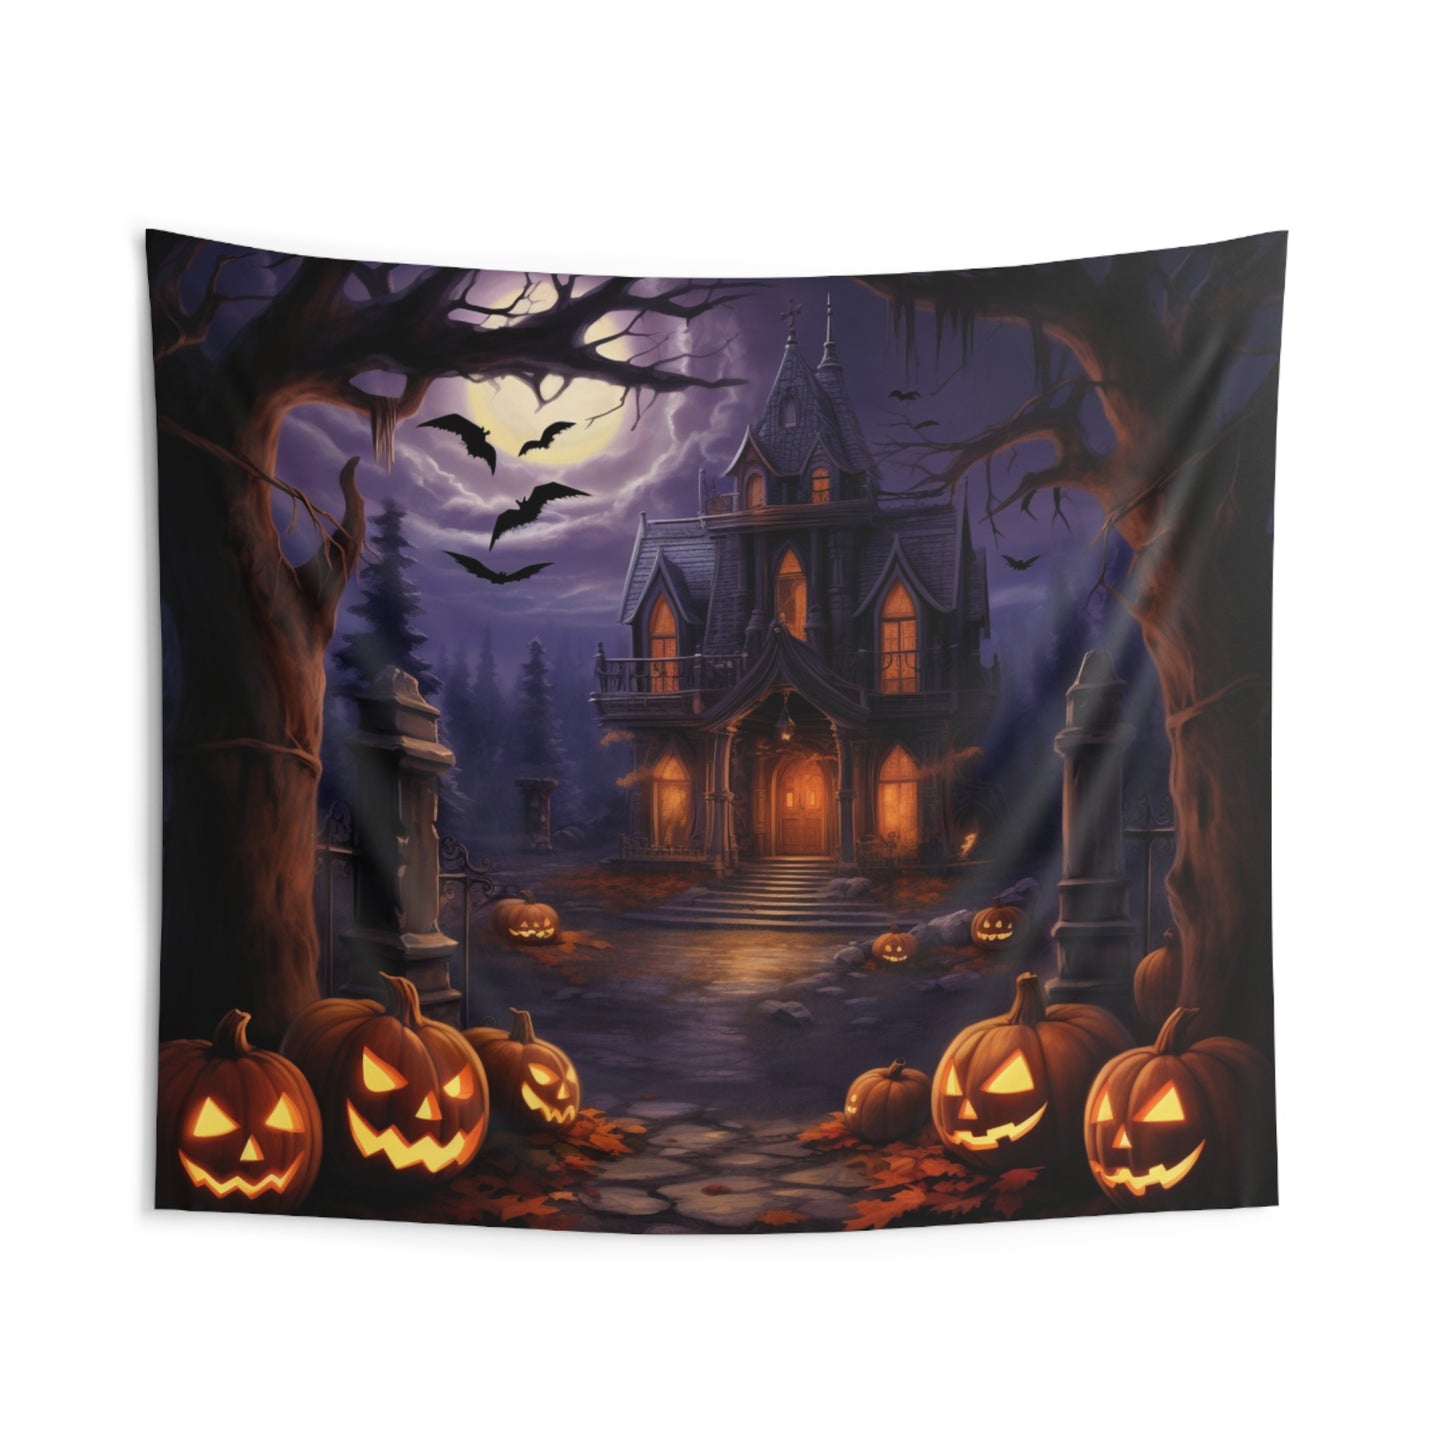 Halloween Tapestry, Spooky Castle Pumpkins Wall Art Hanging Landscape Indoor Aesthetic Large Small Decor Bedroom College Dorm Room Starcove Fashion